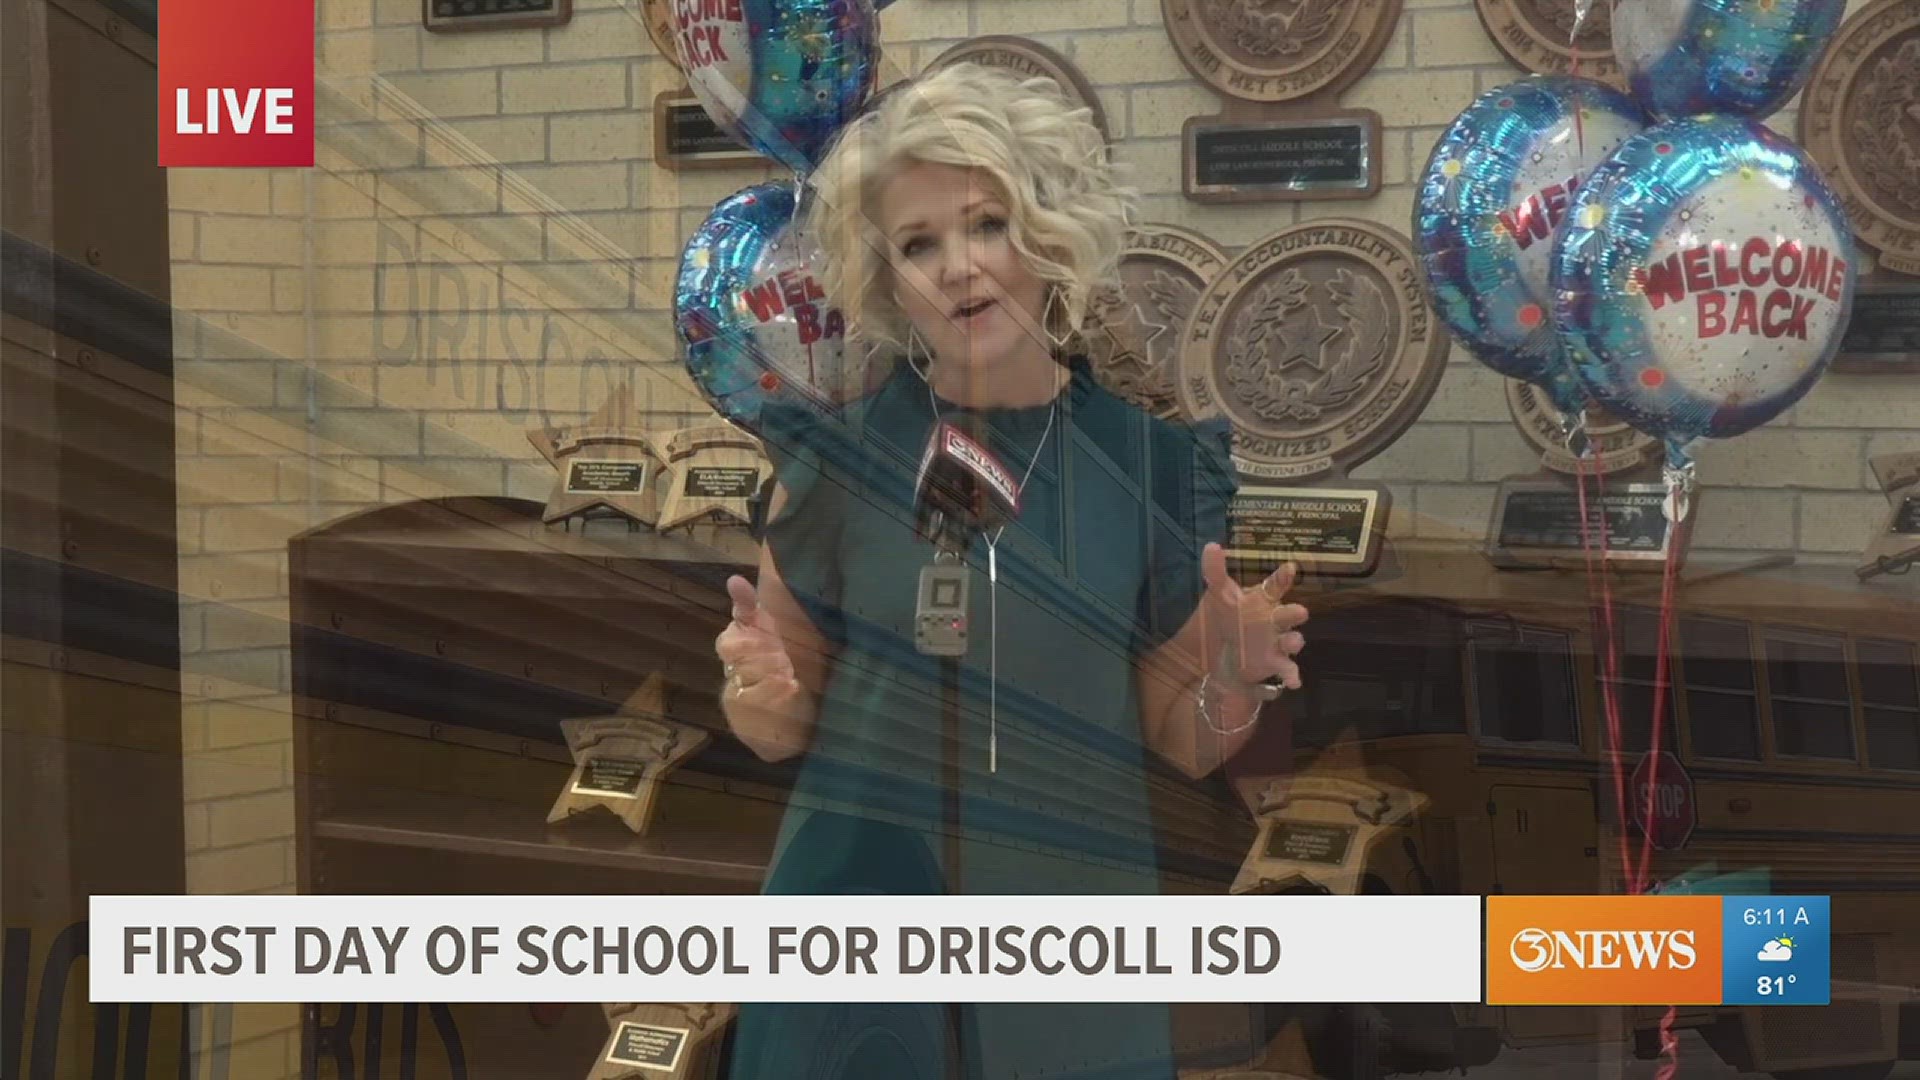 Garcia talked about school safety measures at the beginning of the show.